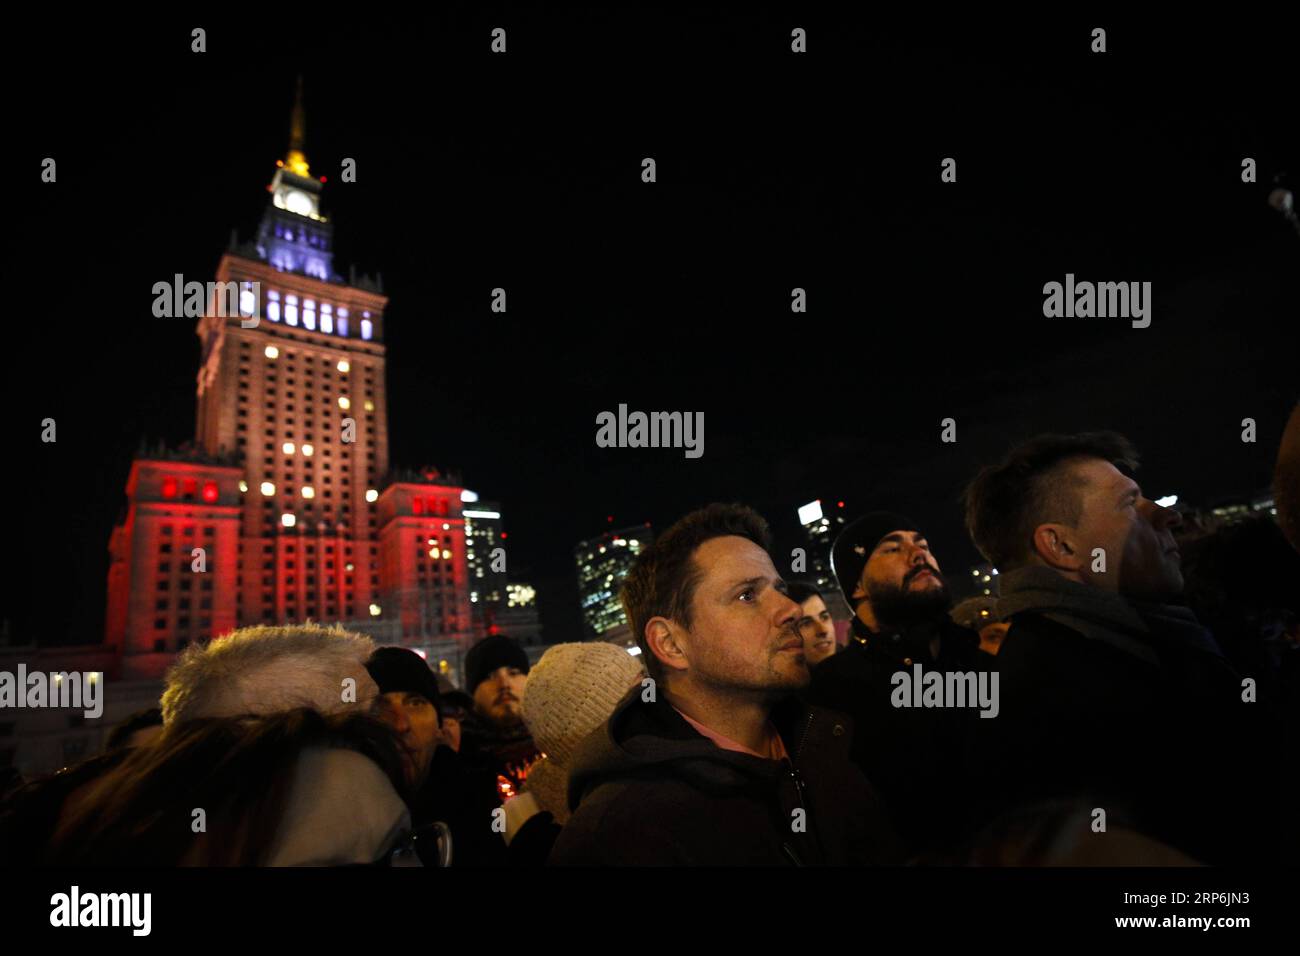 (190115) -- WARSAW, Jan. 15, 2019 -- Mayor of Warsaw Rafal Trzaskowski (C) joins in a march in commemoration of Pawel Adamowicz, the late Mayor of the Polish port city of Gdansk, in center of Warsaw, Poland, Jan. 14, 2018. The UN refugee agency, UNHCR, said Monday it is deeply shocked and saddened to hear that Pawel Adamowicz has died after being stabbed at a charity event. Adamowicz launched the Gdansk Immigrant Integration Model in 2016, a model that has inspired other Polish cities, said the UN agency. The agency wrote in February 2018 that the Gdansk Model is a comprehensive program to hel Stock Photo